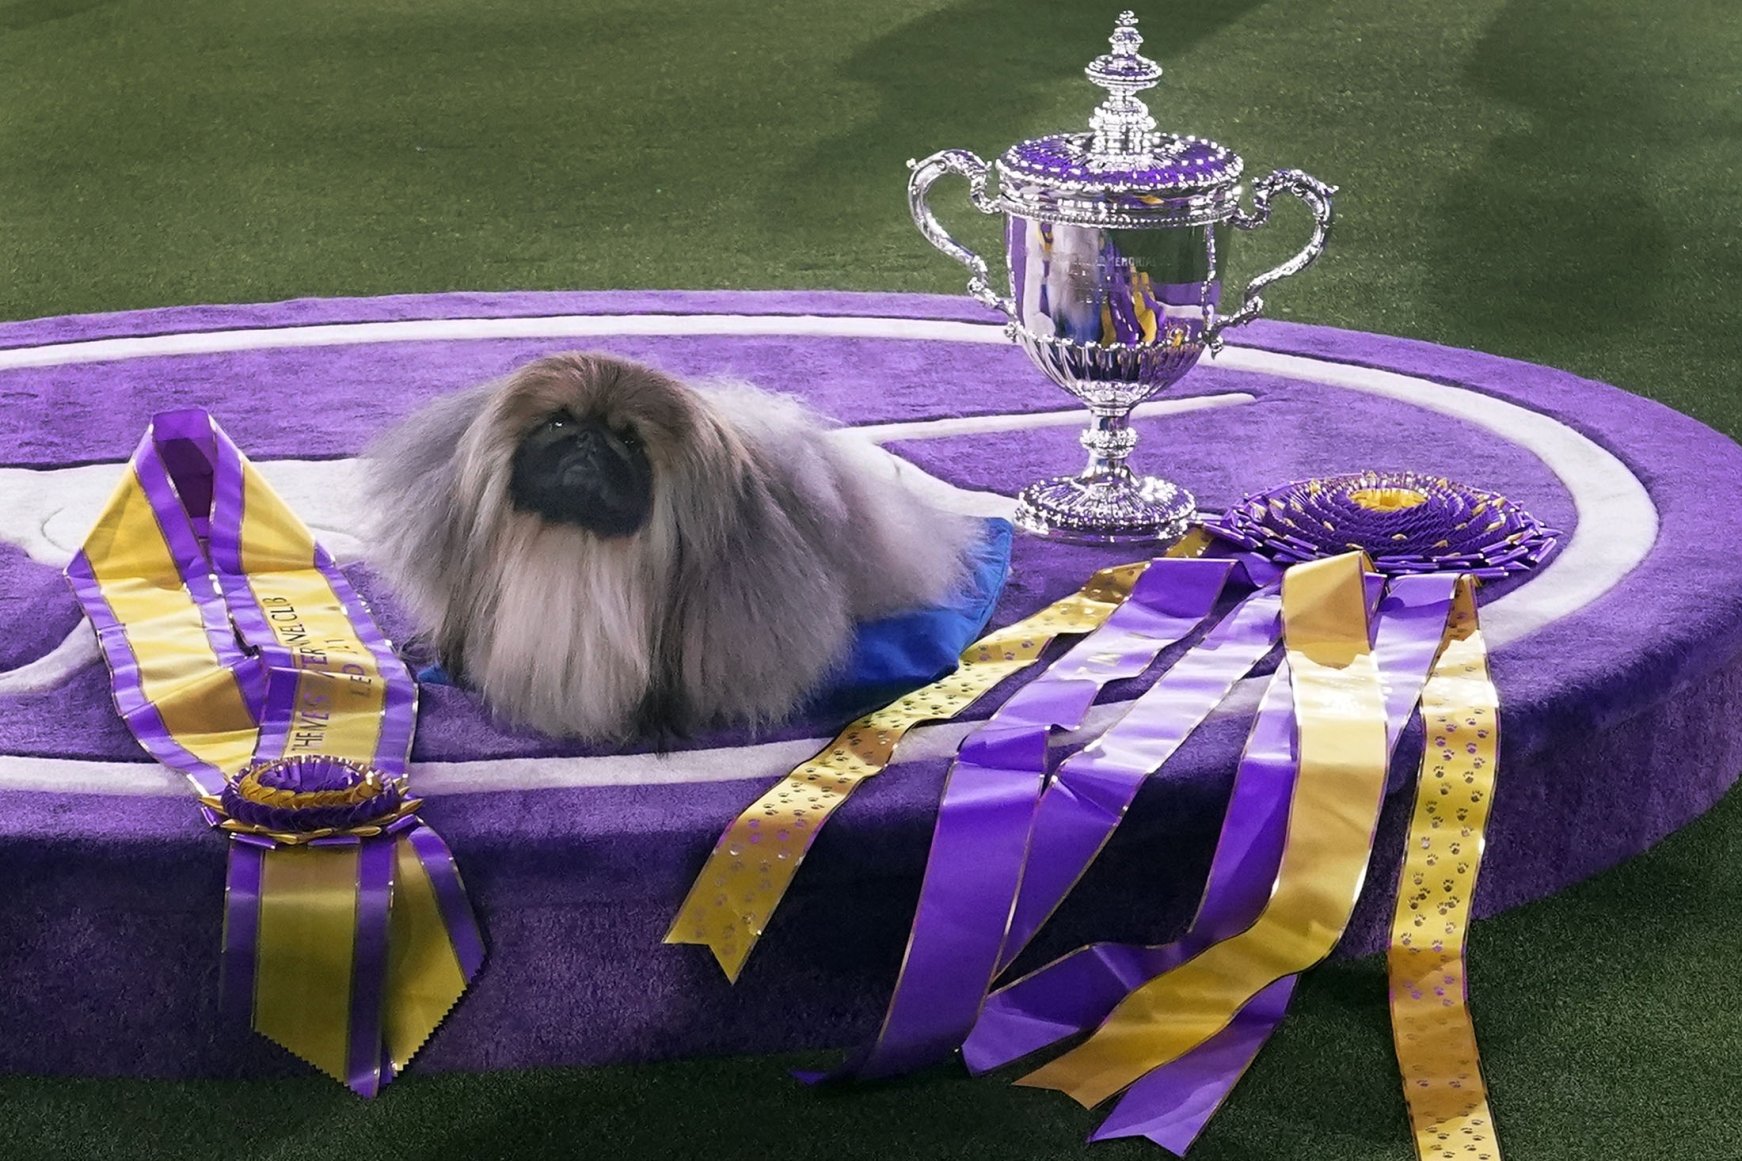 Who's a good boy? Inside the 145th Westminster Kennel Club Dog Show